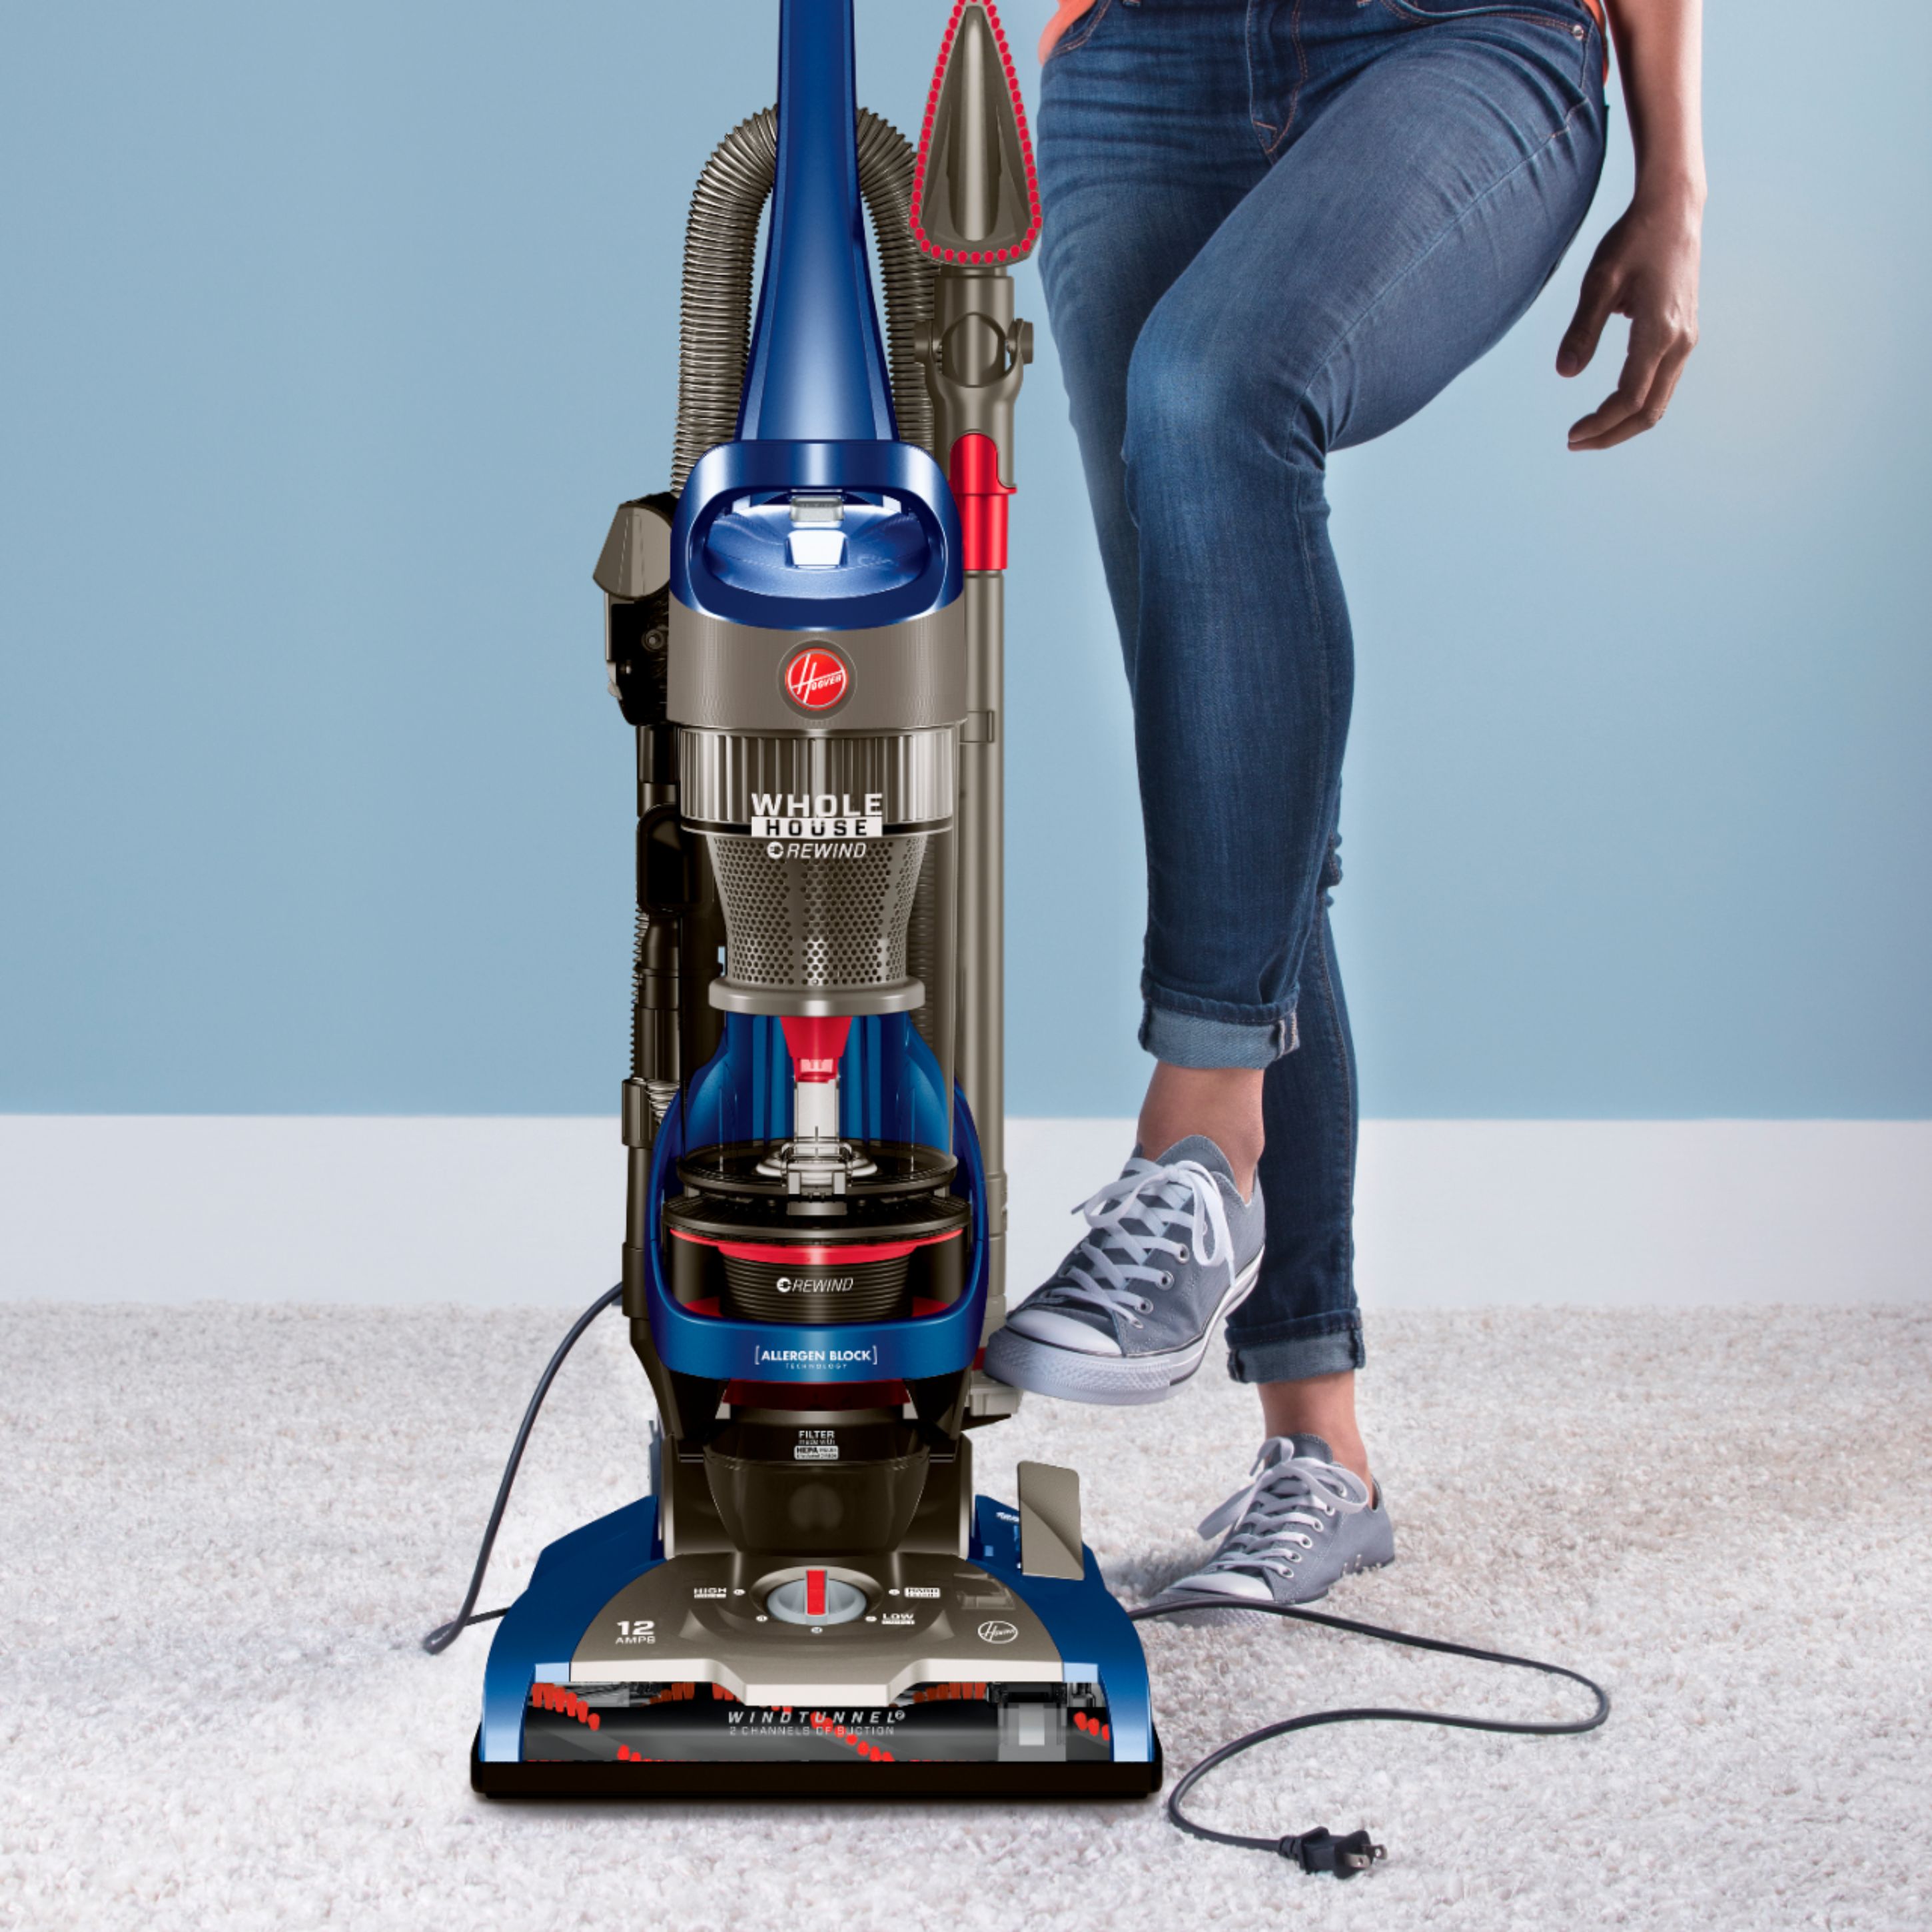 Blue Hoover WindTunnel 2 Whole House Rewind Bagless Upright Vacuum 